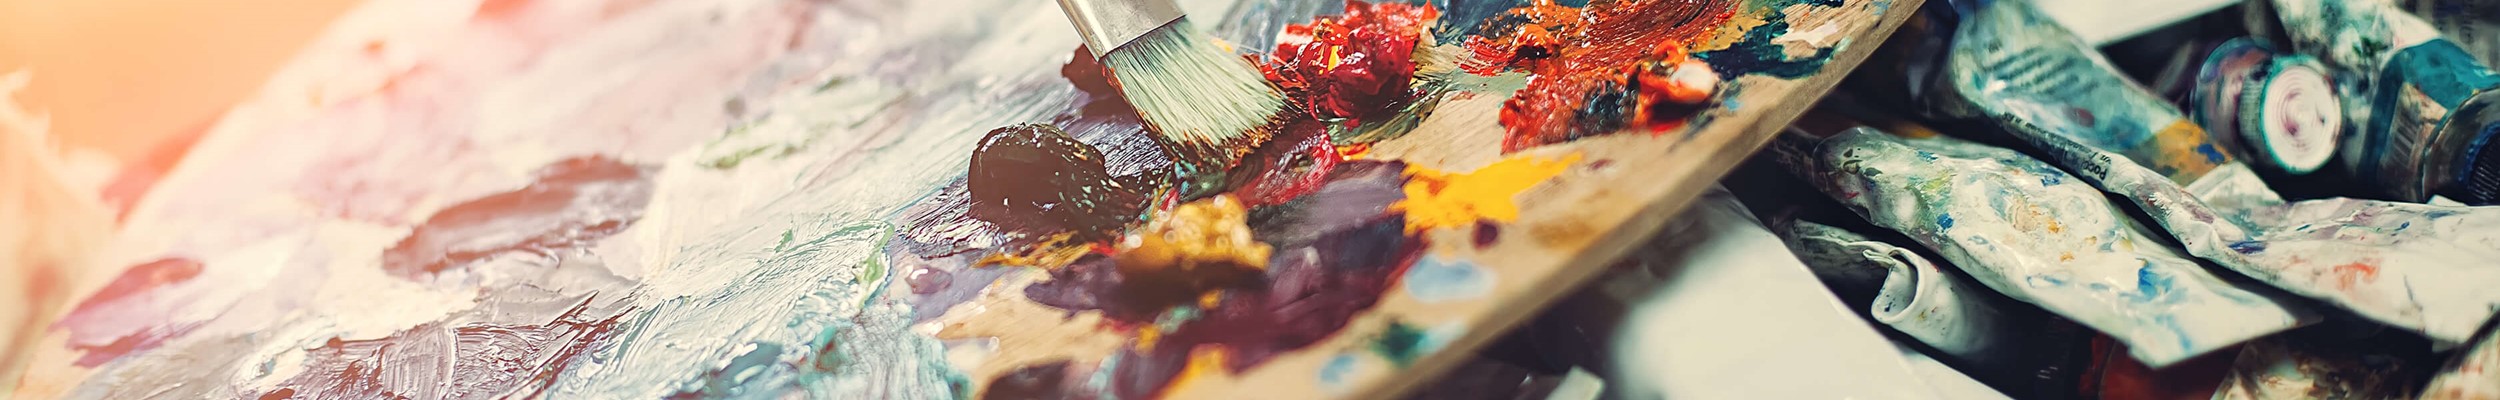 Painting with wooden palette